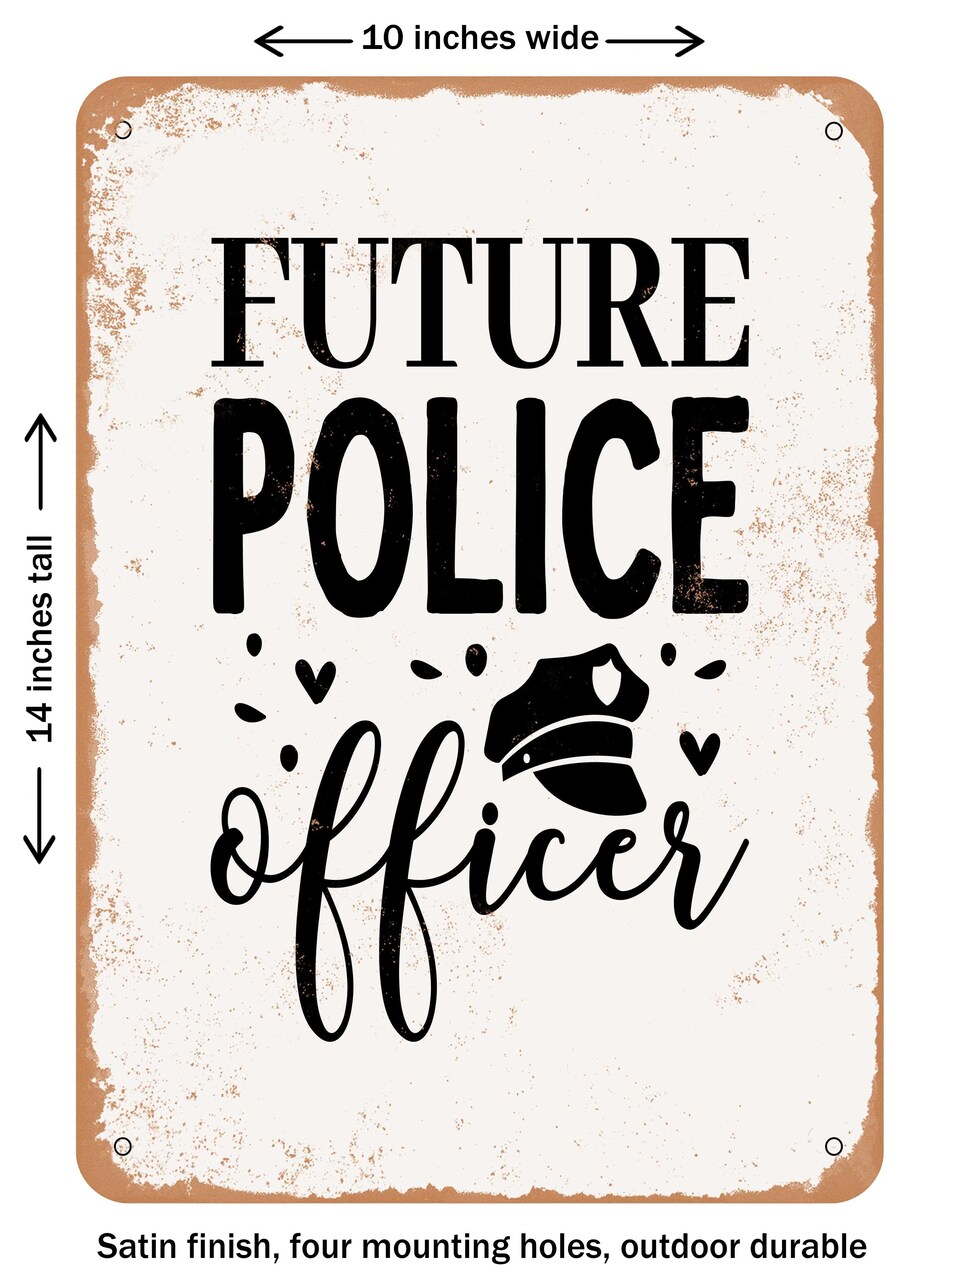 DECORATIVE METAL SIGN - Future Police Officer  - Vintage Rusty Look